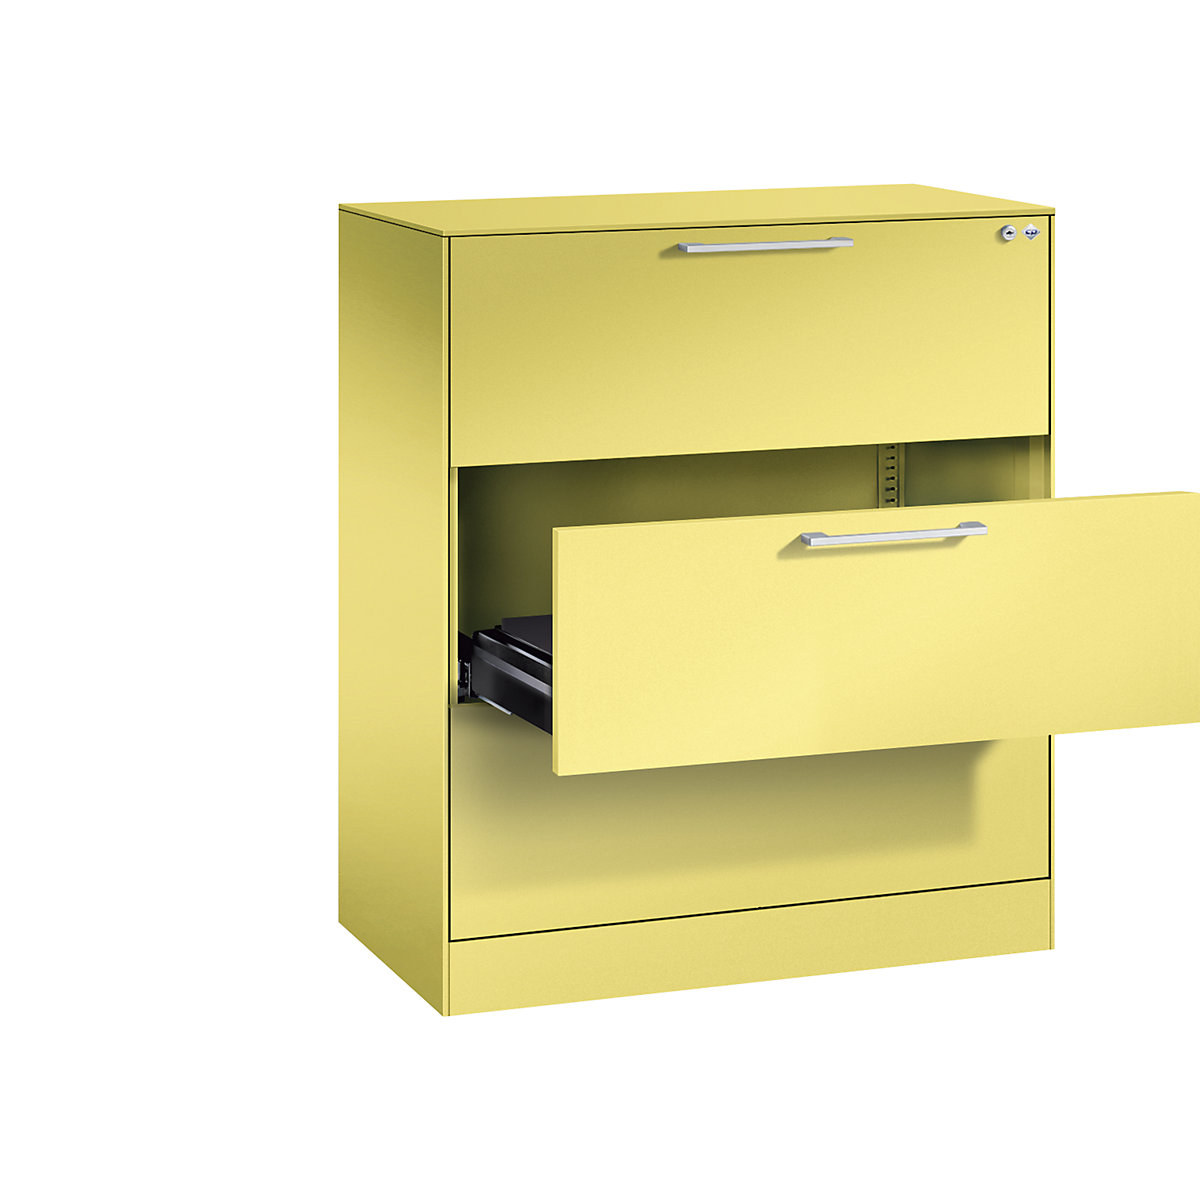 ASISTO card file cabinet – C+P, height 992 mm, with 3 drawers, A4 landscape, sulphur yellow/sulphur yellow-15